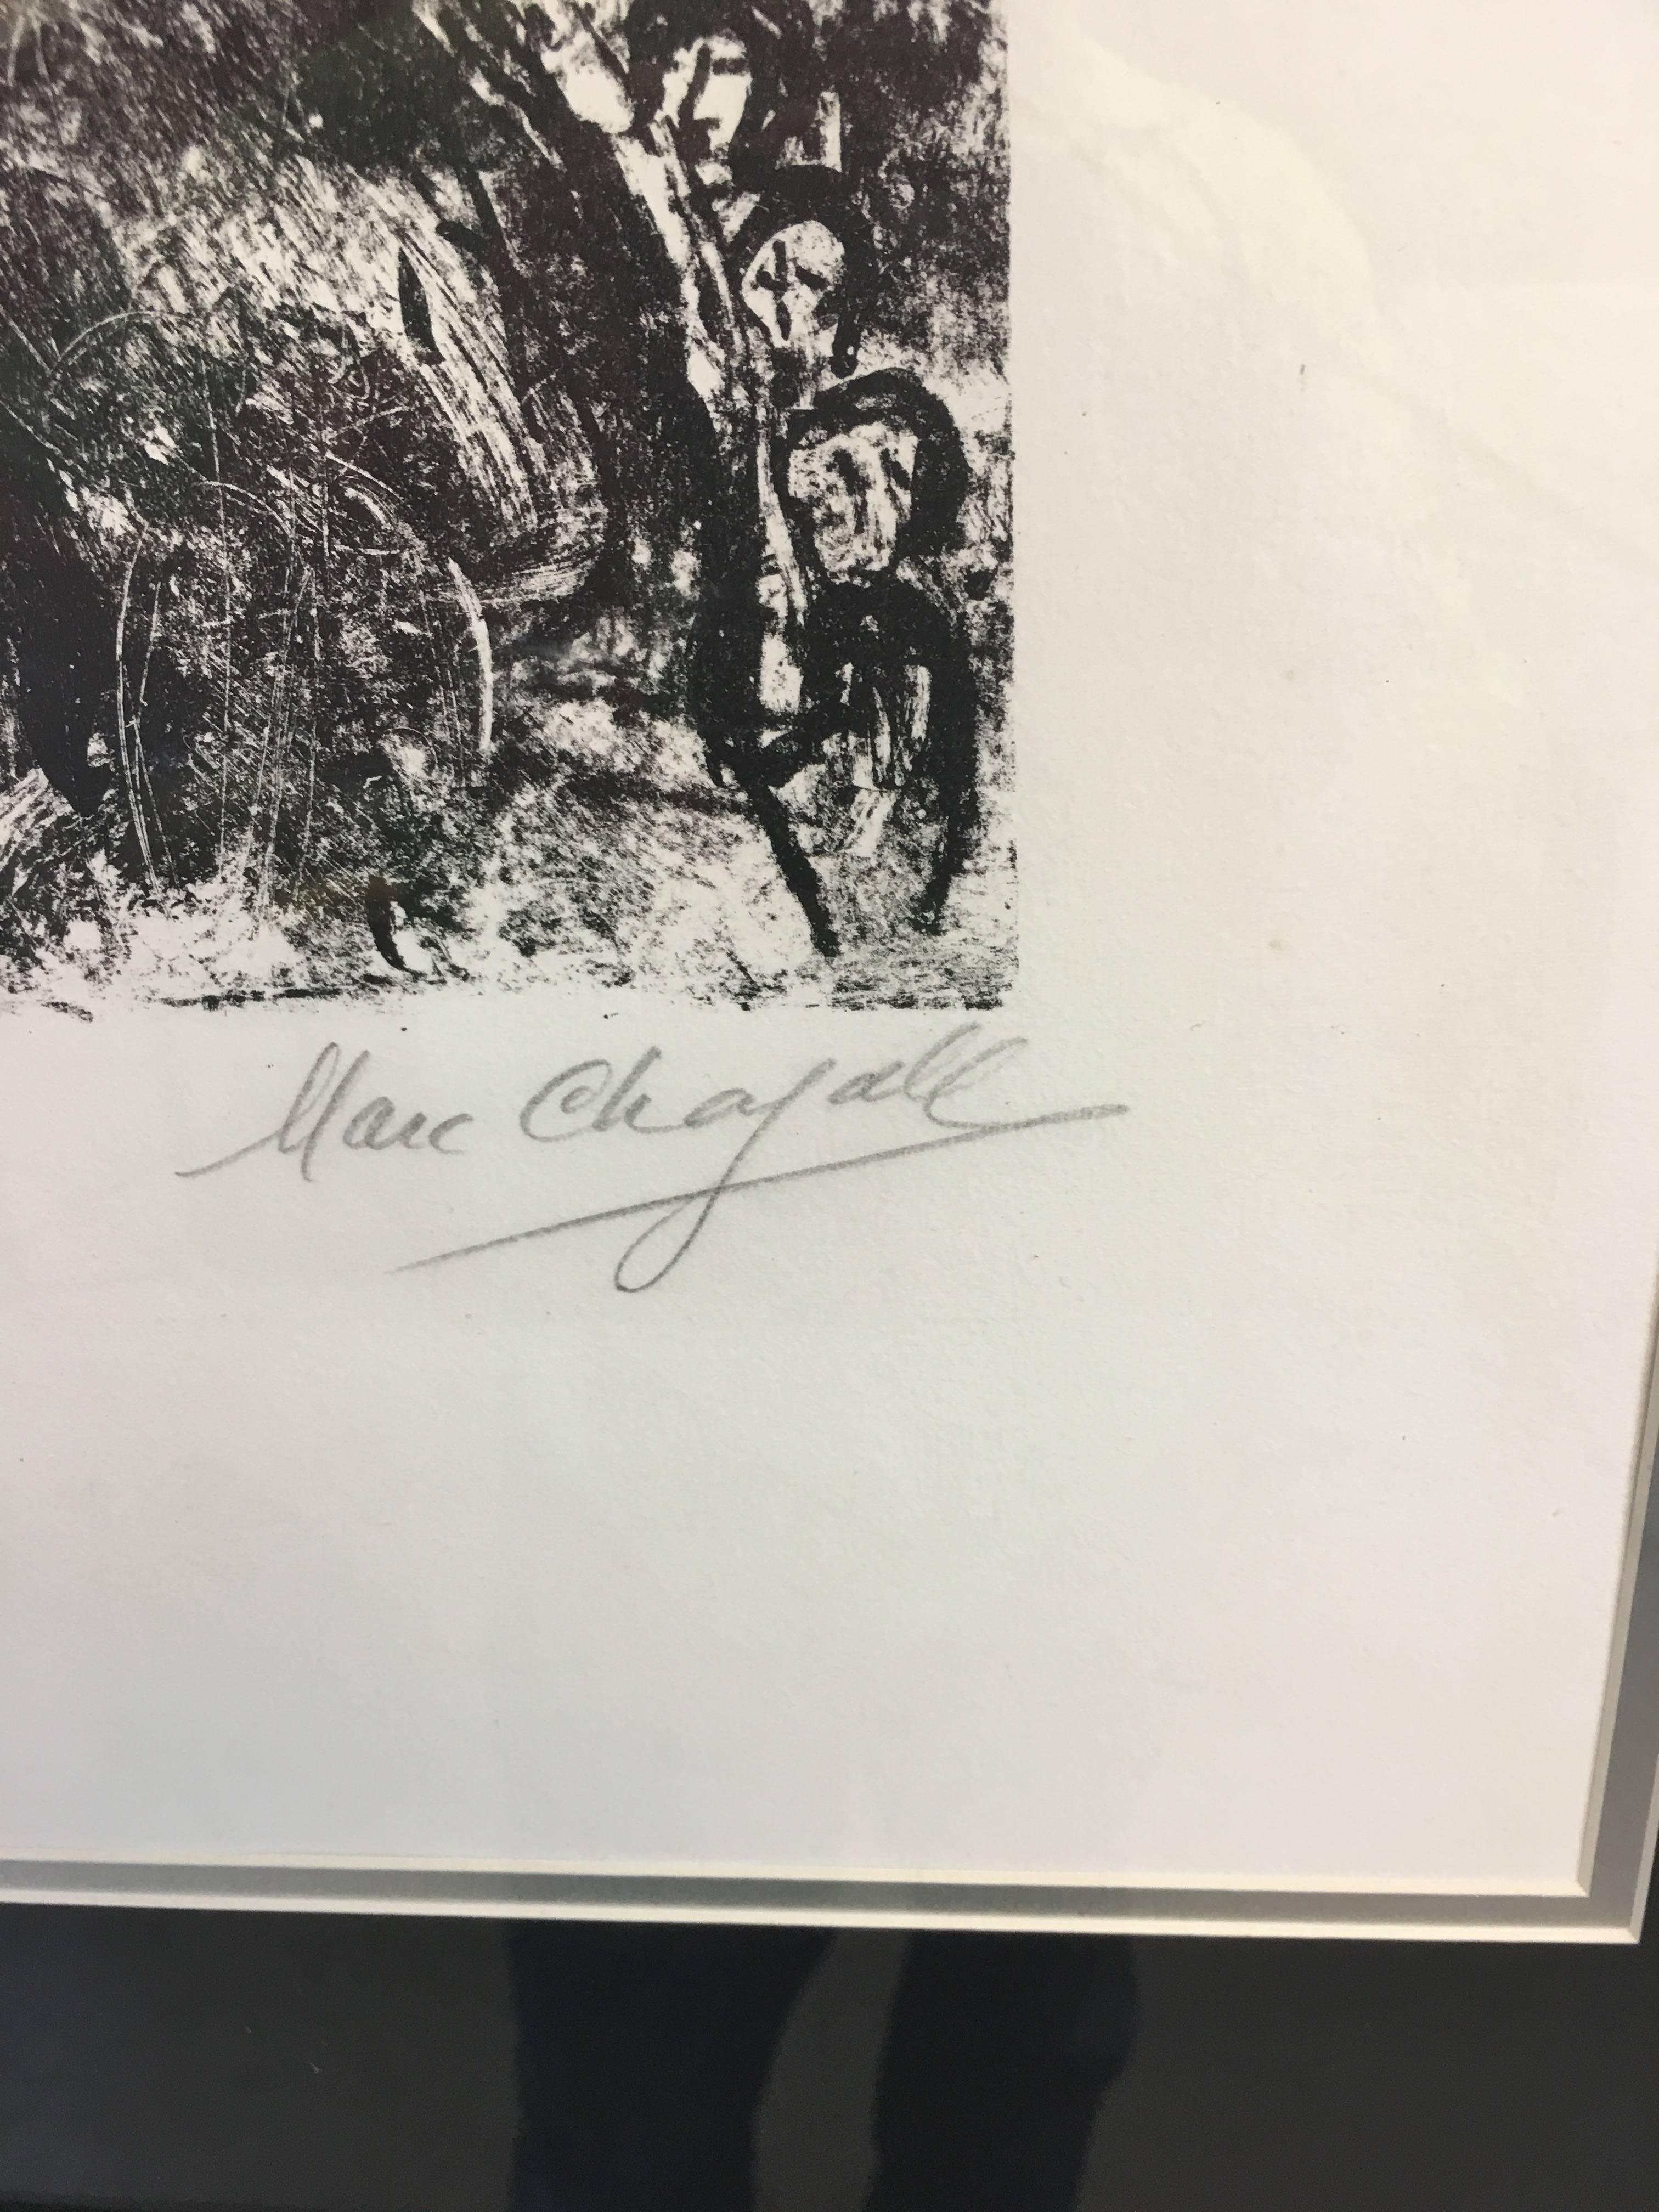 This Chagall lithograph is from a very limited edition of 30. This one is numbered in pencil bottom left hand corner 21/30. It is signed in pencil Marc Chagall in bottom right hand corner. It is titled 